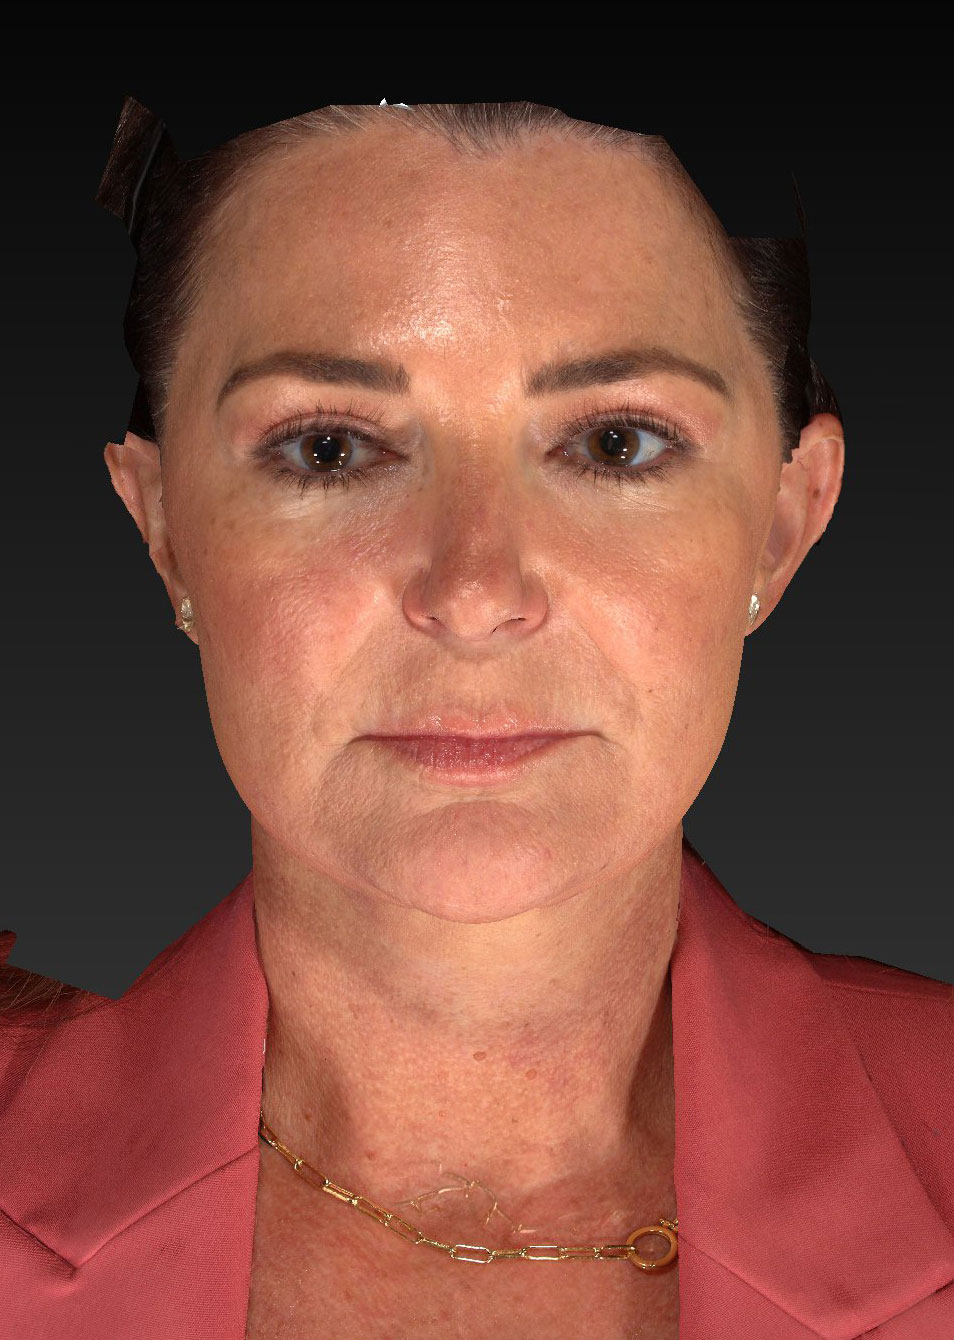 Facelift: Lower Face And Neck Lift Before and After 08